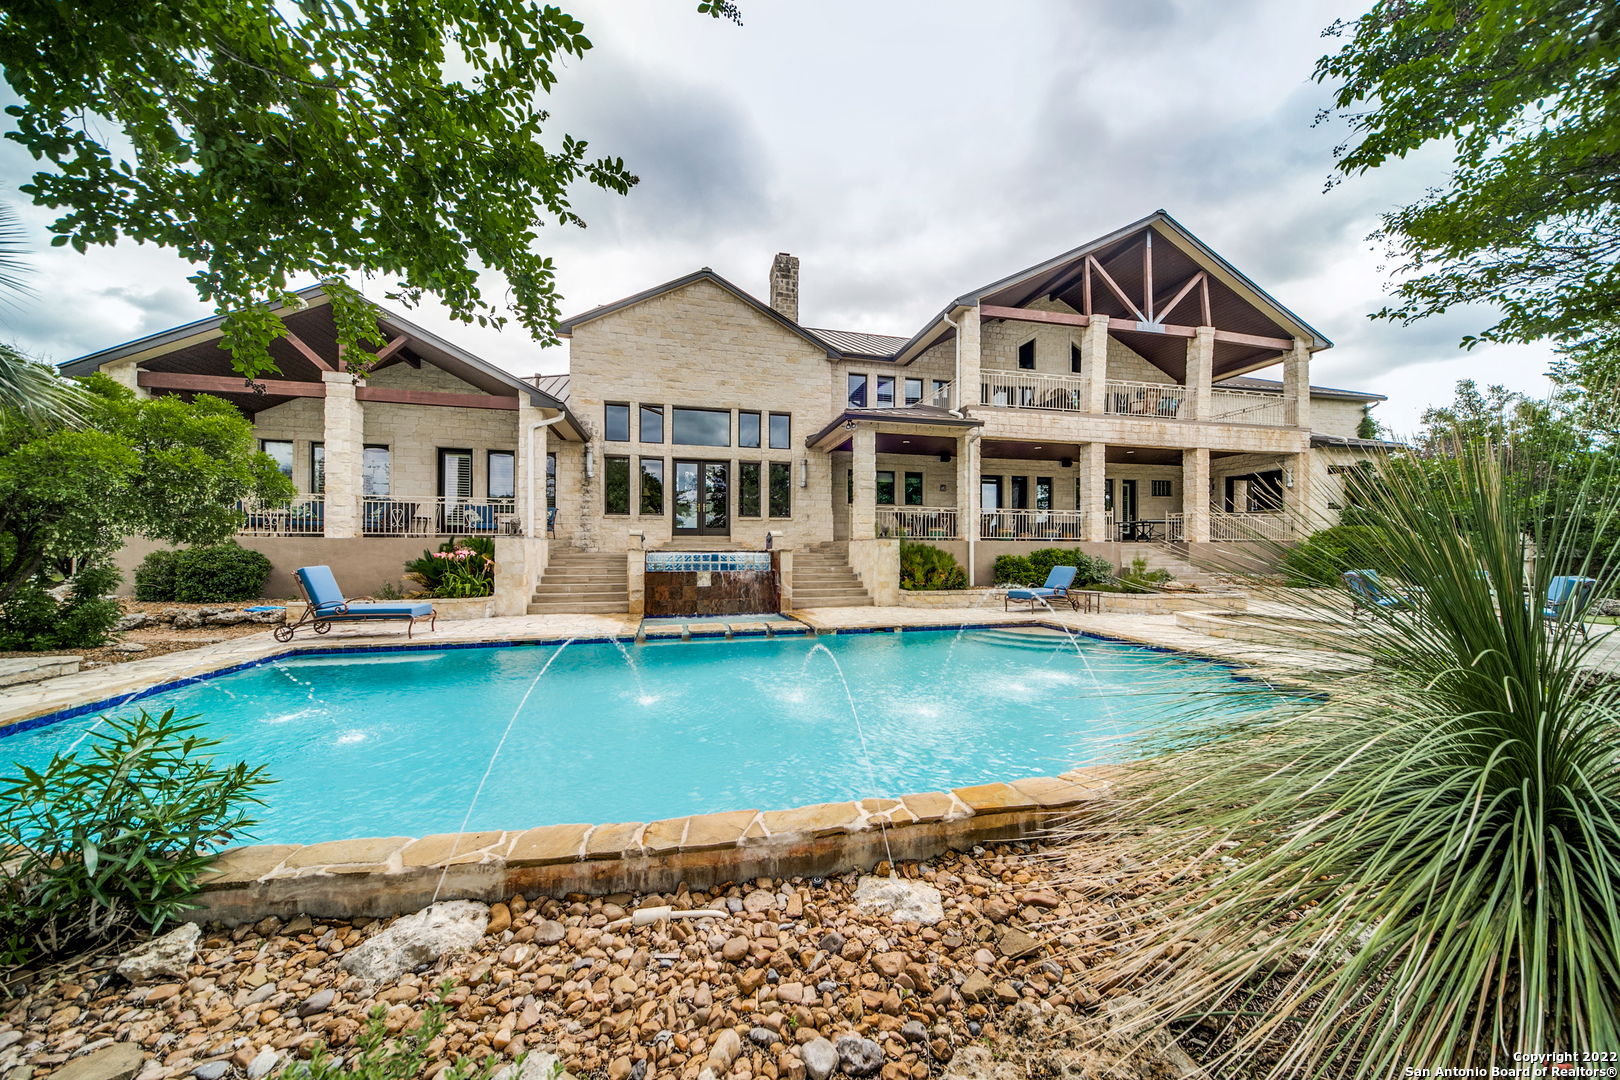 Majestic Custom Estate in the prestigious Cordillera Ranch sits on 4.5+acres. The stately entrance draws you in to the grand hallway filled with light, picturesque windows, and Hill Country views! The impressive space offers both formal and informal rooms catering to many different styles of entertaining and highlighted by the remarkable game room and large media room. The chef's kitchen boasts a double island, upscale stainless-steel appliances, Five Star 6 burner cooktop, double Dacor ovens, Sub-zero side by side refrigerator/freezer and a butler's pantry for the ultimate host! Master suite features lavish sitting area with a dual-sided wood-burning fireplace, stepped ceiling, outside access, and a spa-like bath complete with separate vanities, jetted tub, and walk-in shower. The well-appointed private study, downstairs guest room and spacious secondary bedroom suites complete the interior of this home. Step outside for breathtaking views and an elevated resort-like setting to entertain or simply relax in luxury featuring covered patios, pool and spa with waterfalls, putting green, fire pit and Biergarten for all your outdoor culinary needs. This is Hill Country living at it's BEST!